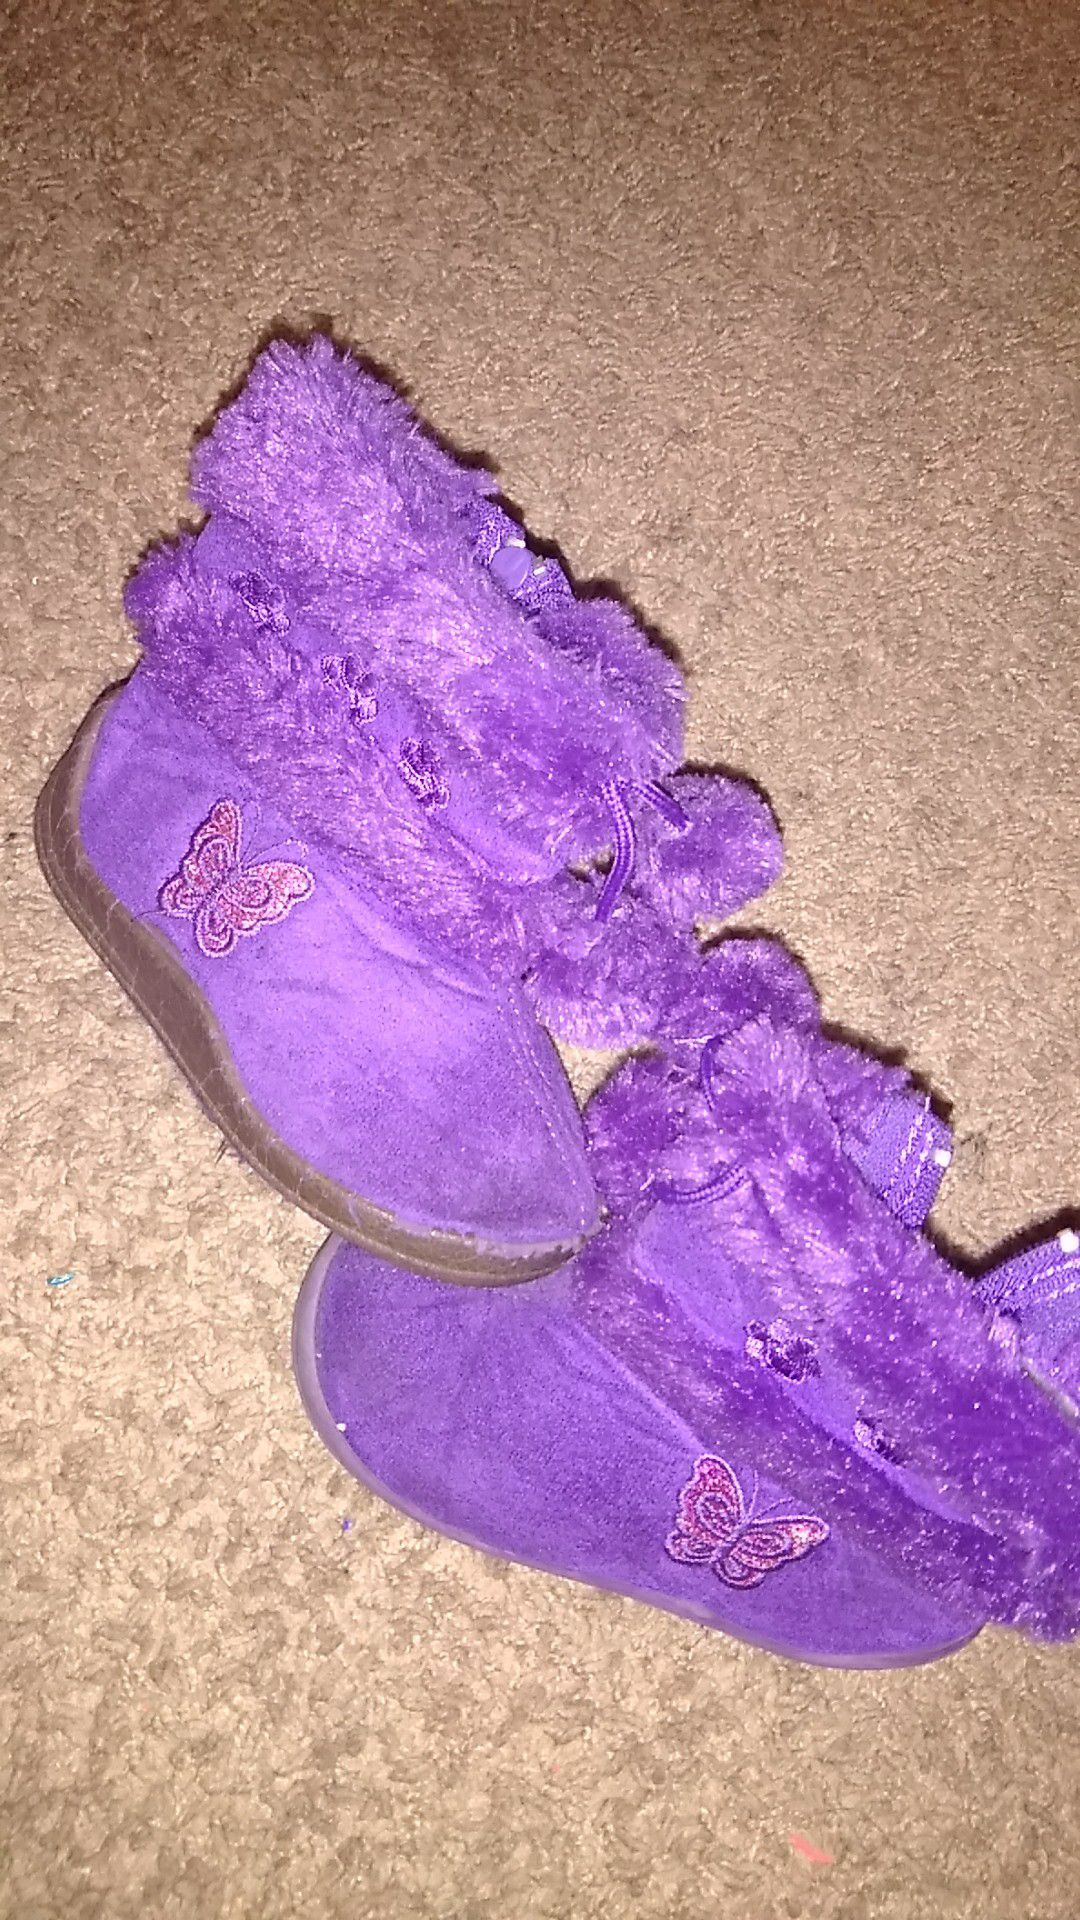 Girls Toddler Snow boots size 4